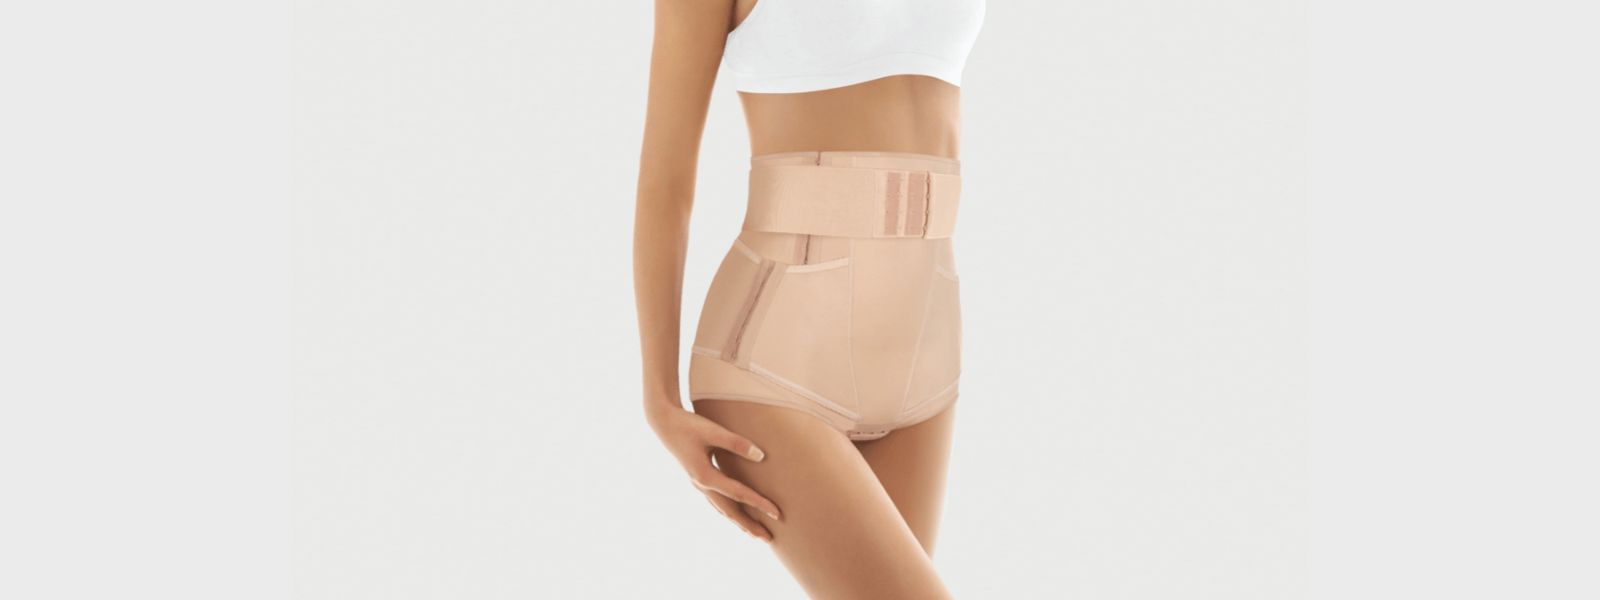 Wear Compression Garments after Tummy Tuck Surgery 